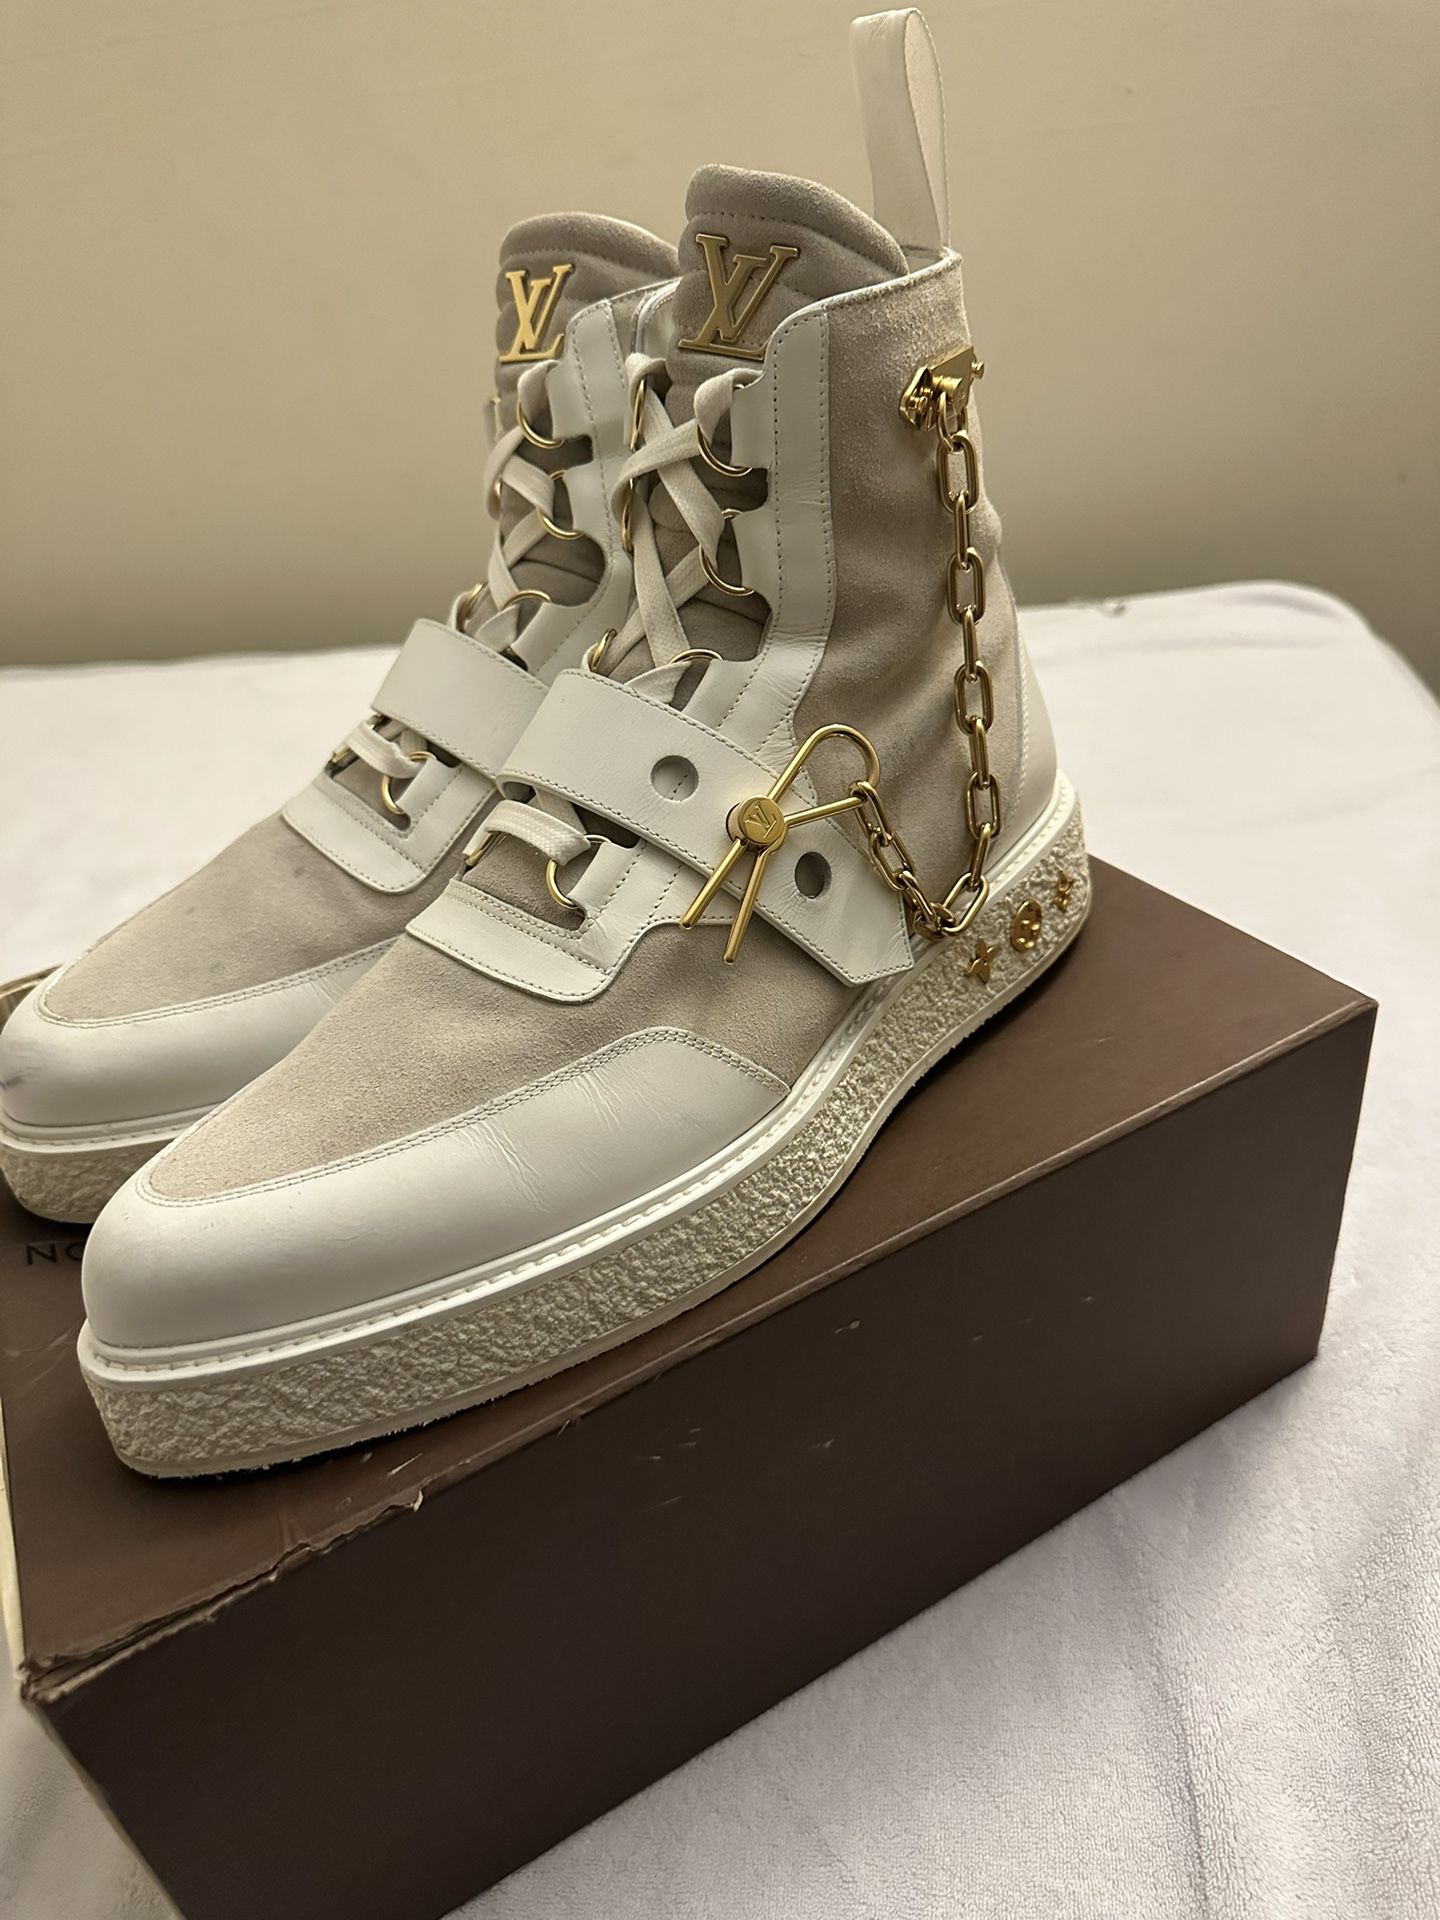 LOUIS VUITTON Virgil Abloh Creeper Ankle Boot White for Sale in Bridgewater  Township, NJ - OfferUp